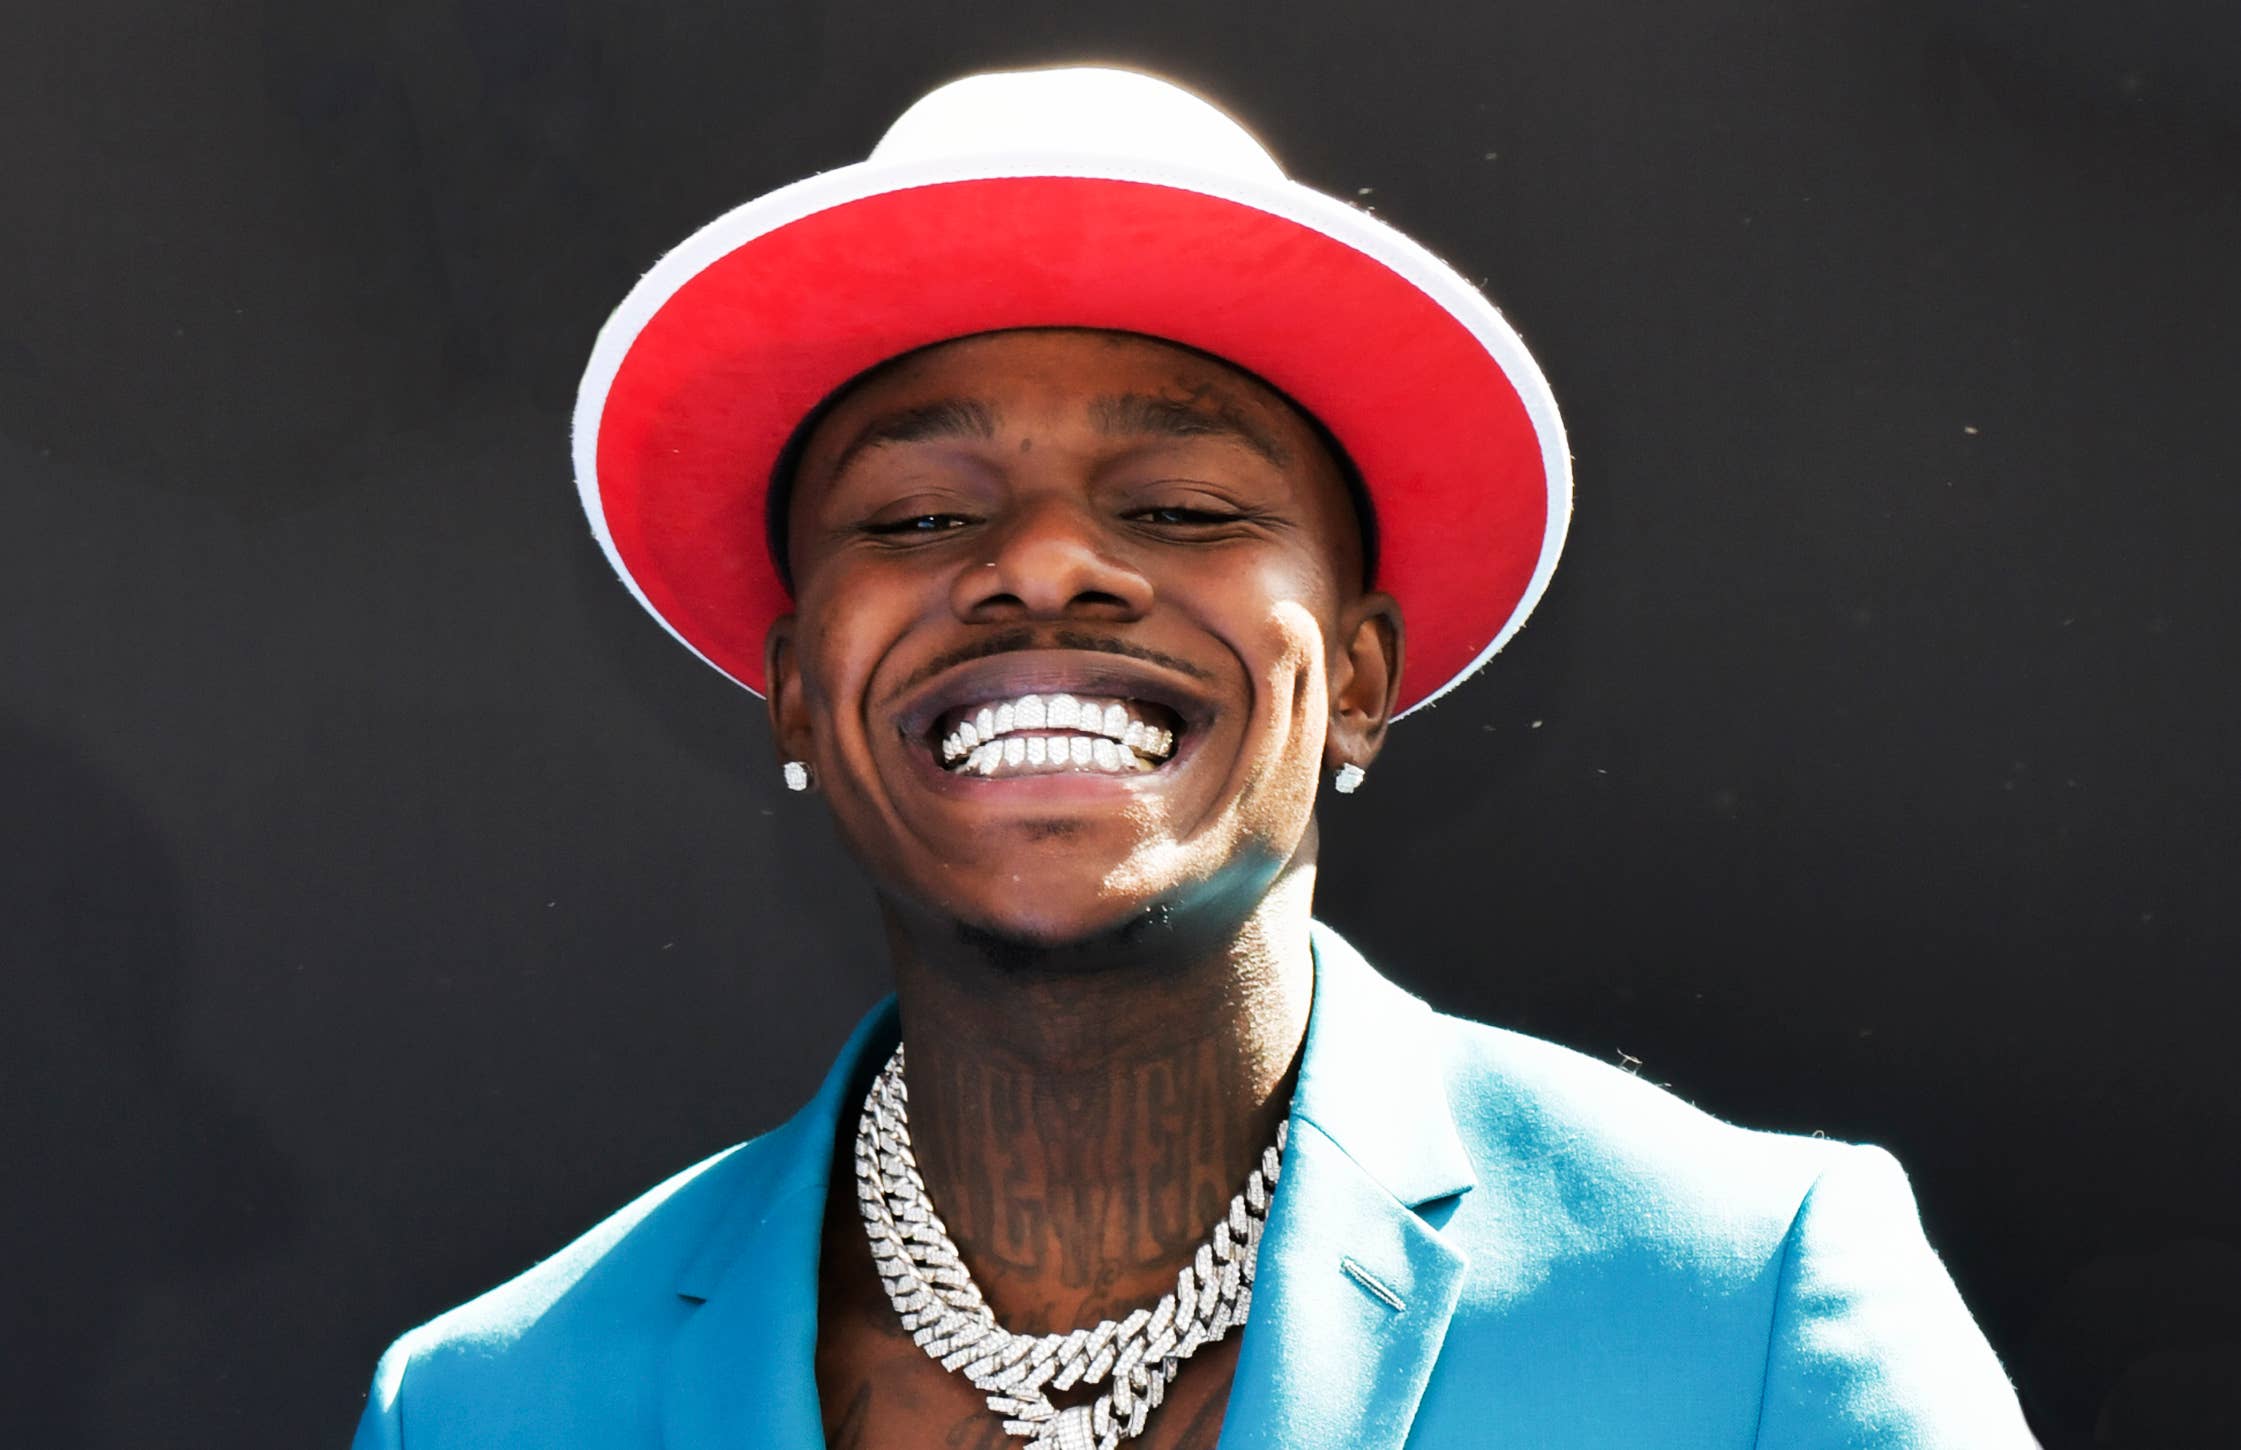 DaBaby Getty image